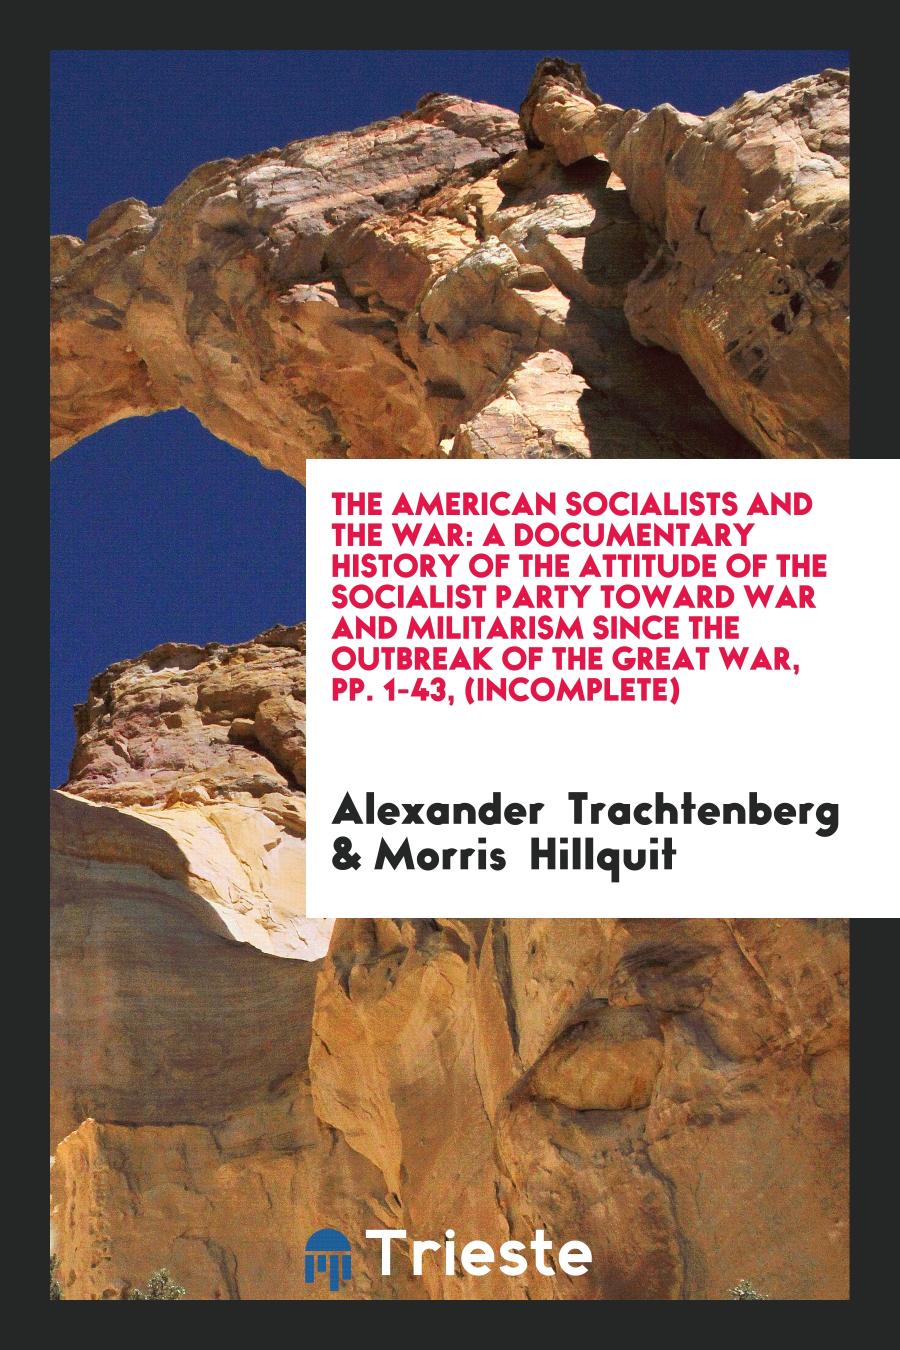 The American Socialists and the War: a documentary history of the attitude of the Socialist Party toward war and militarism since the outbreak of the great war, pp. 1-43, (incomplete)